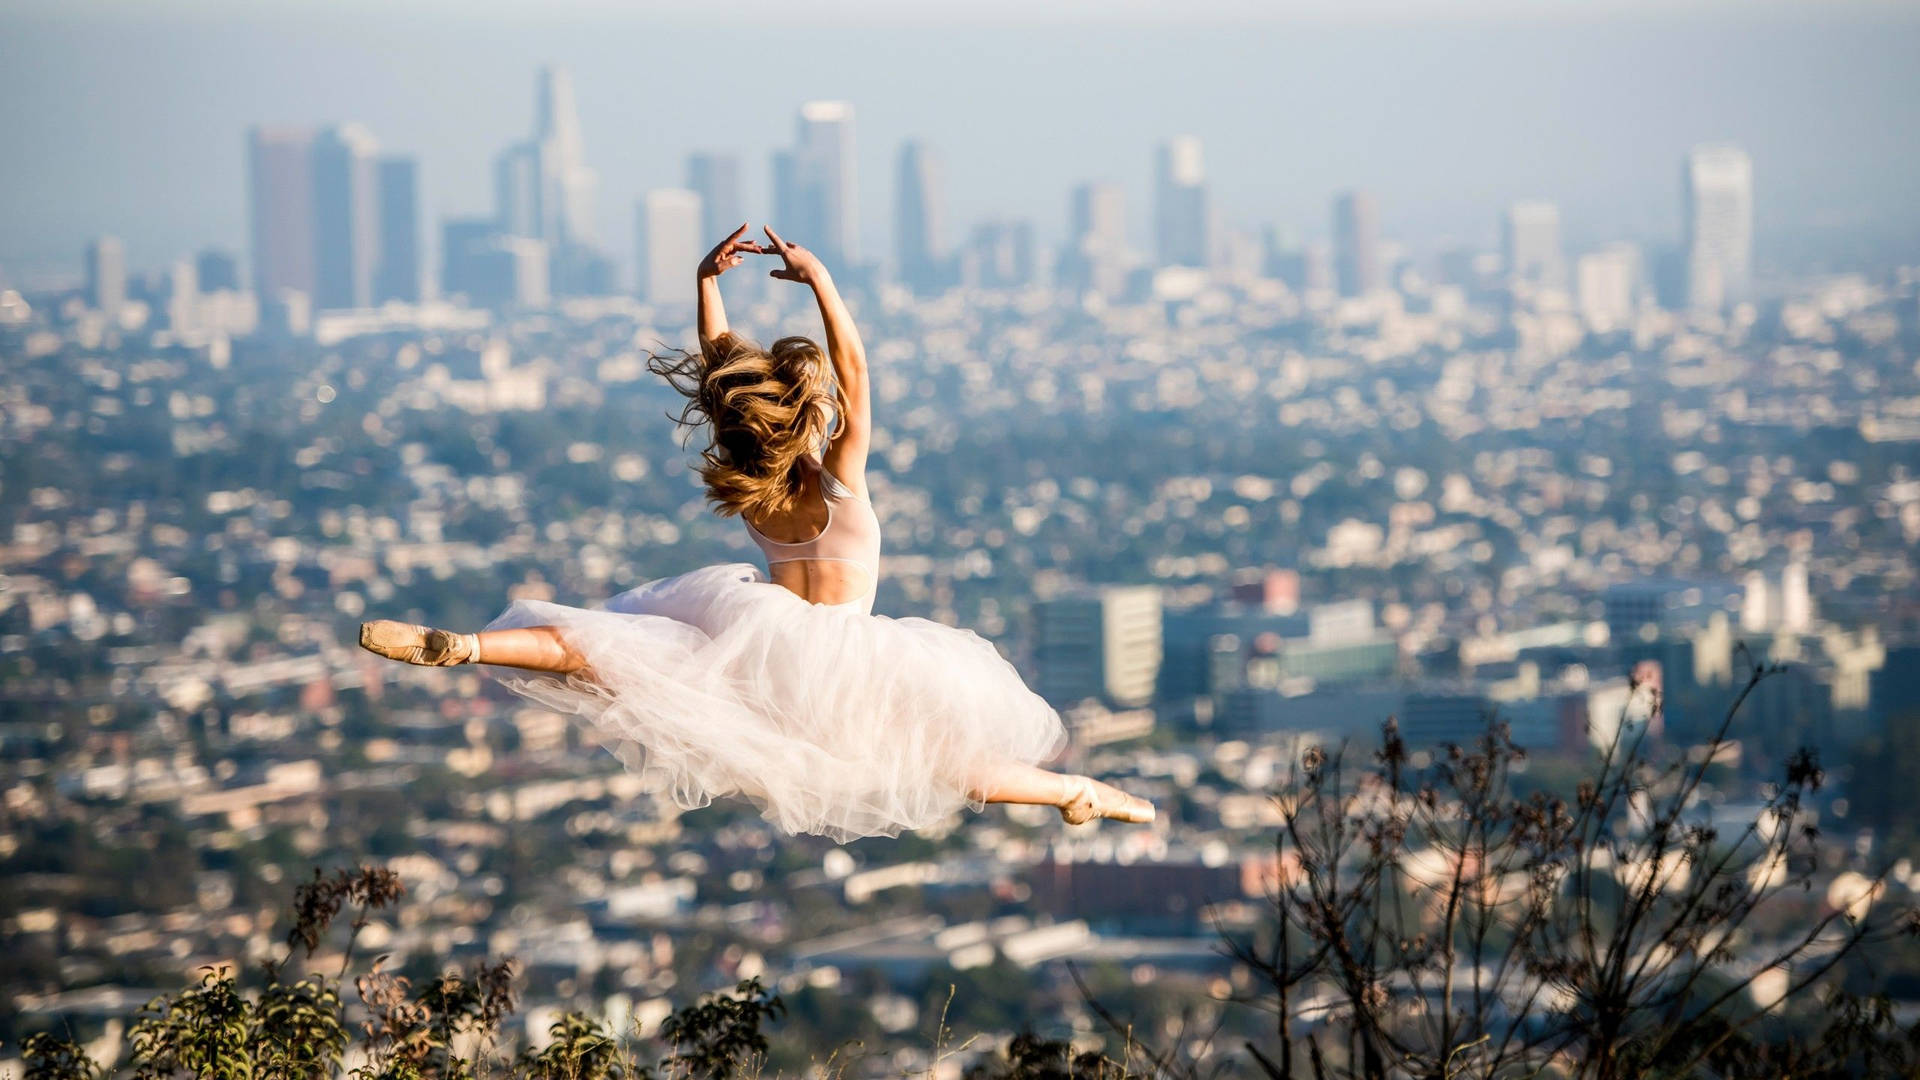 Ballet Dancer With City Overview Wallpaper